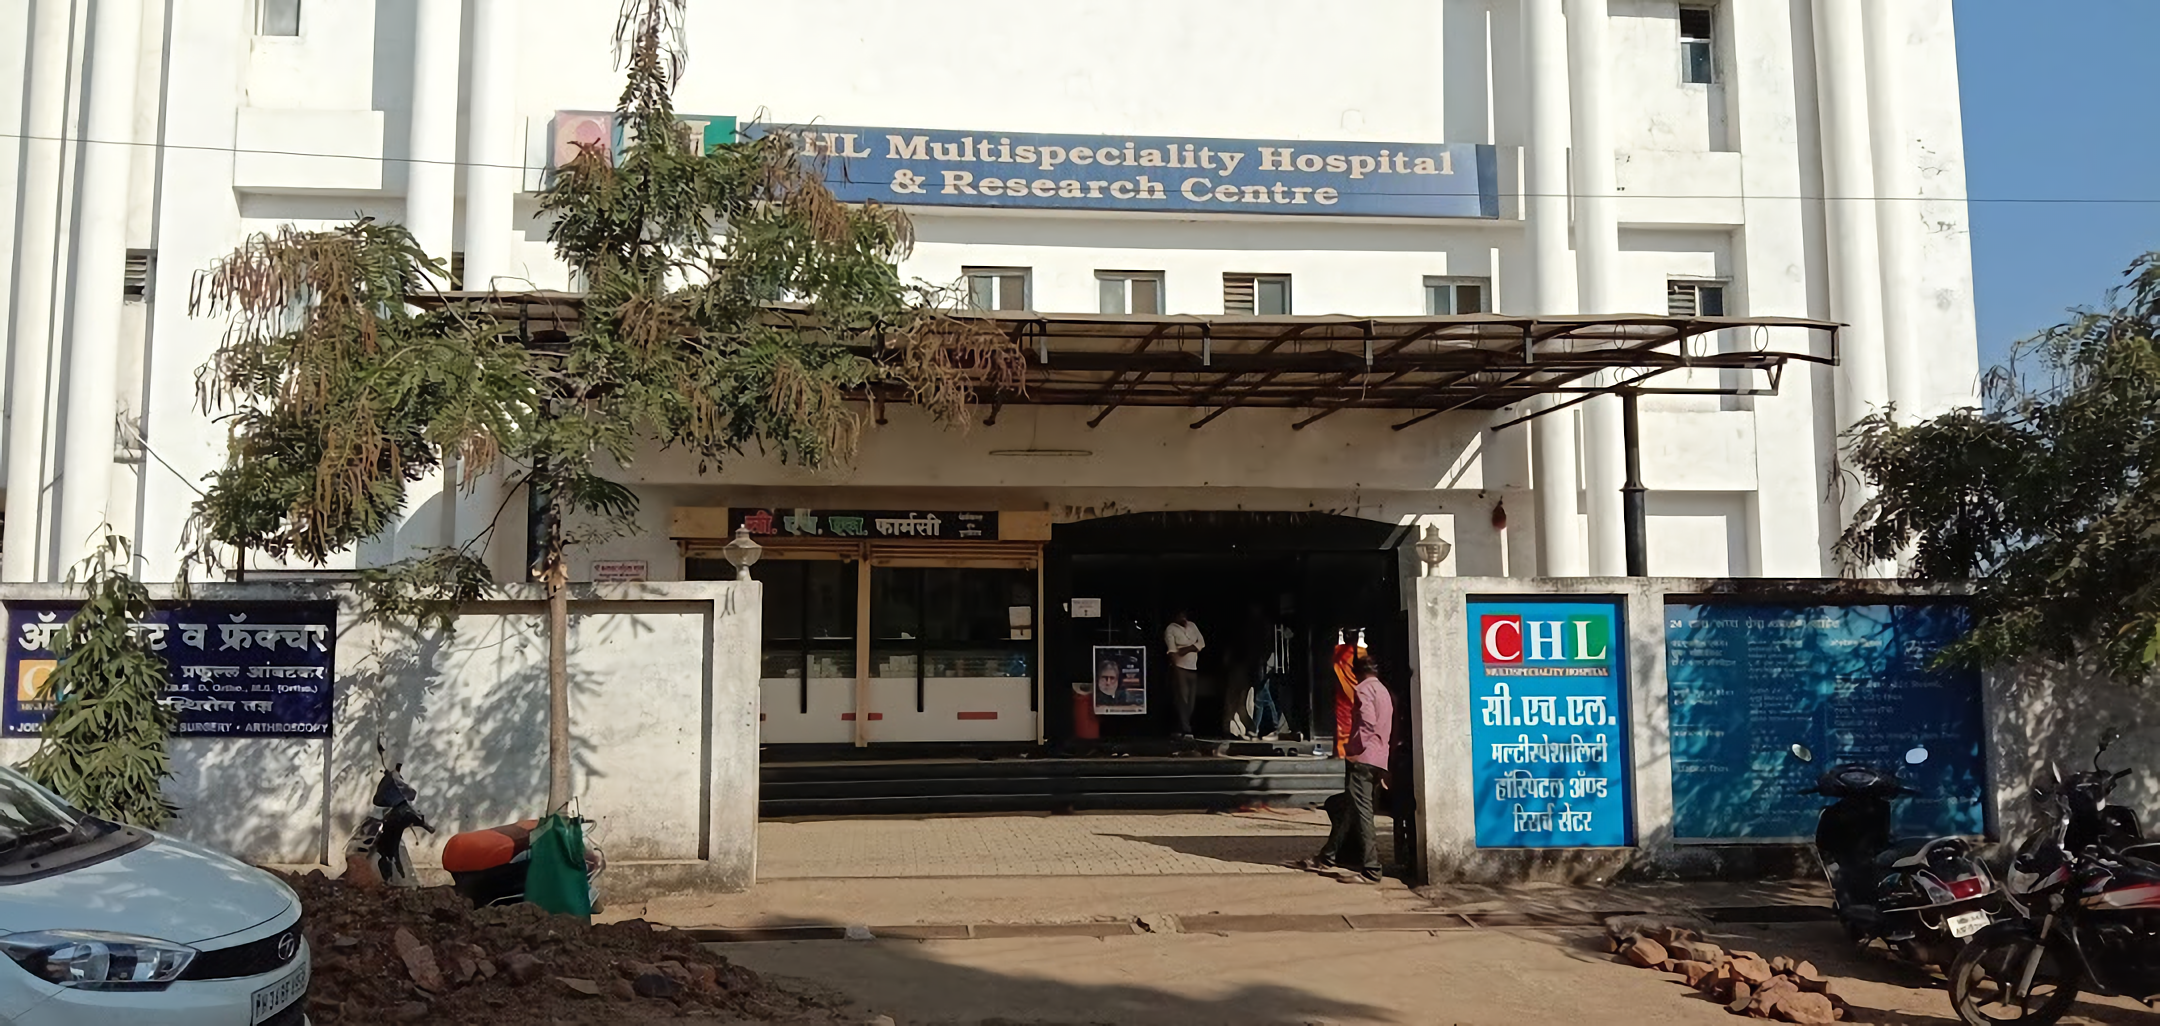 CHL Multispeciality Hospital And Research Centre